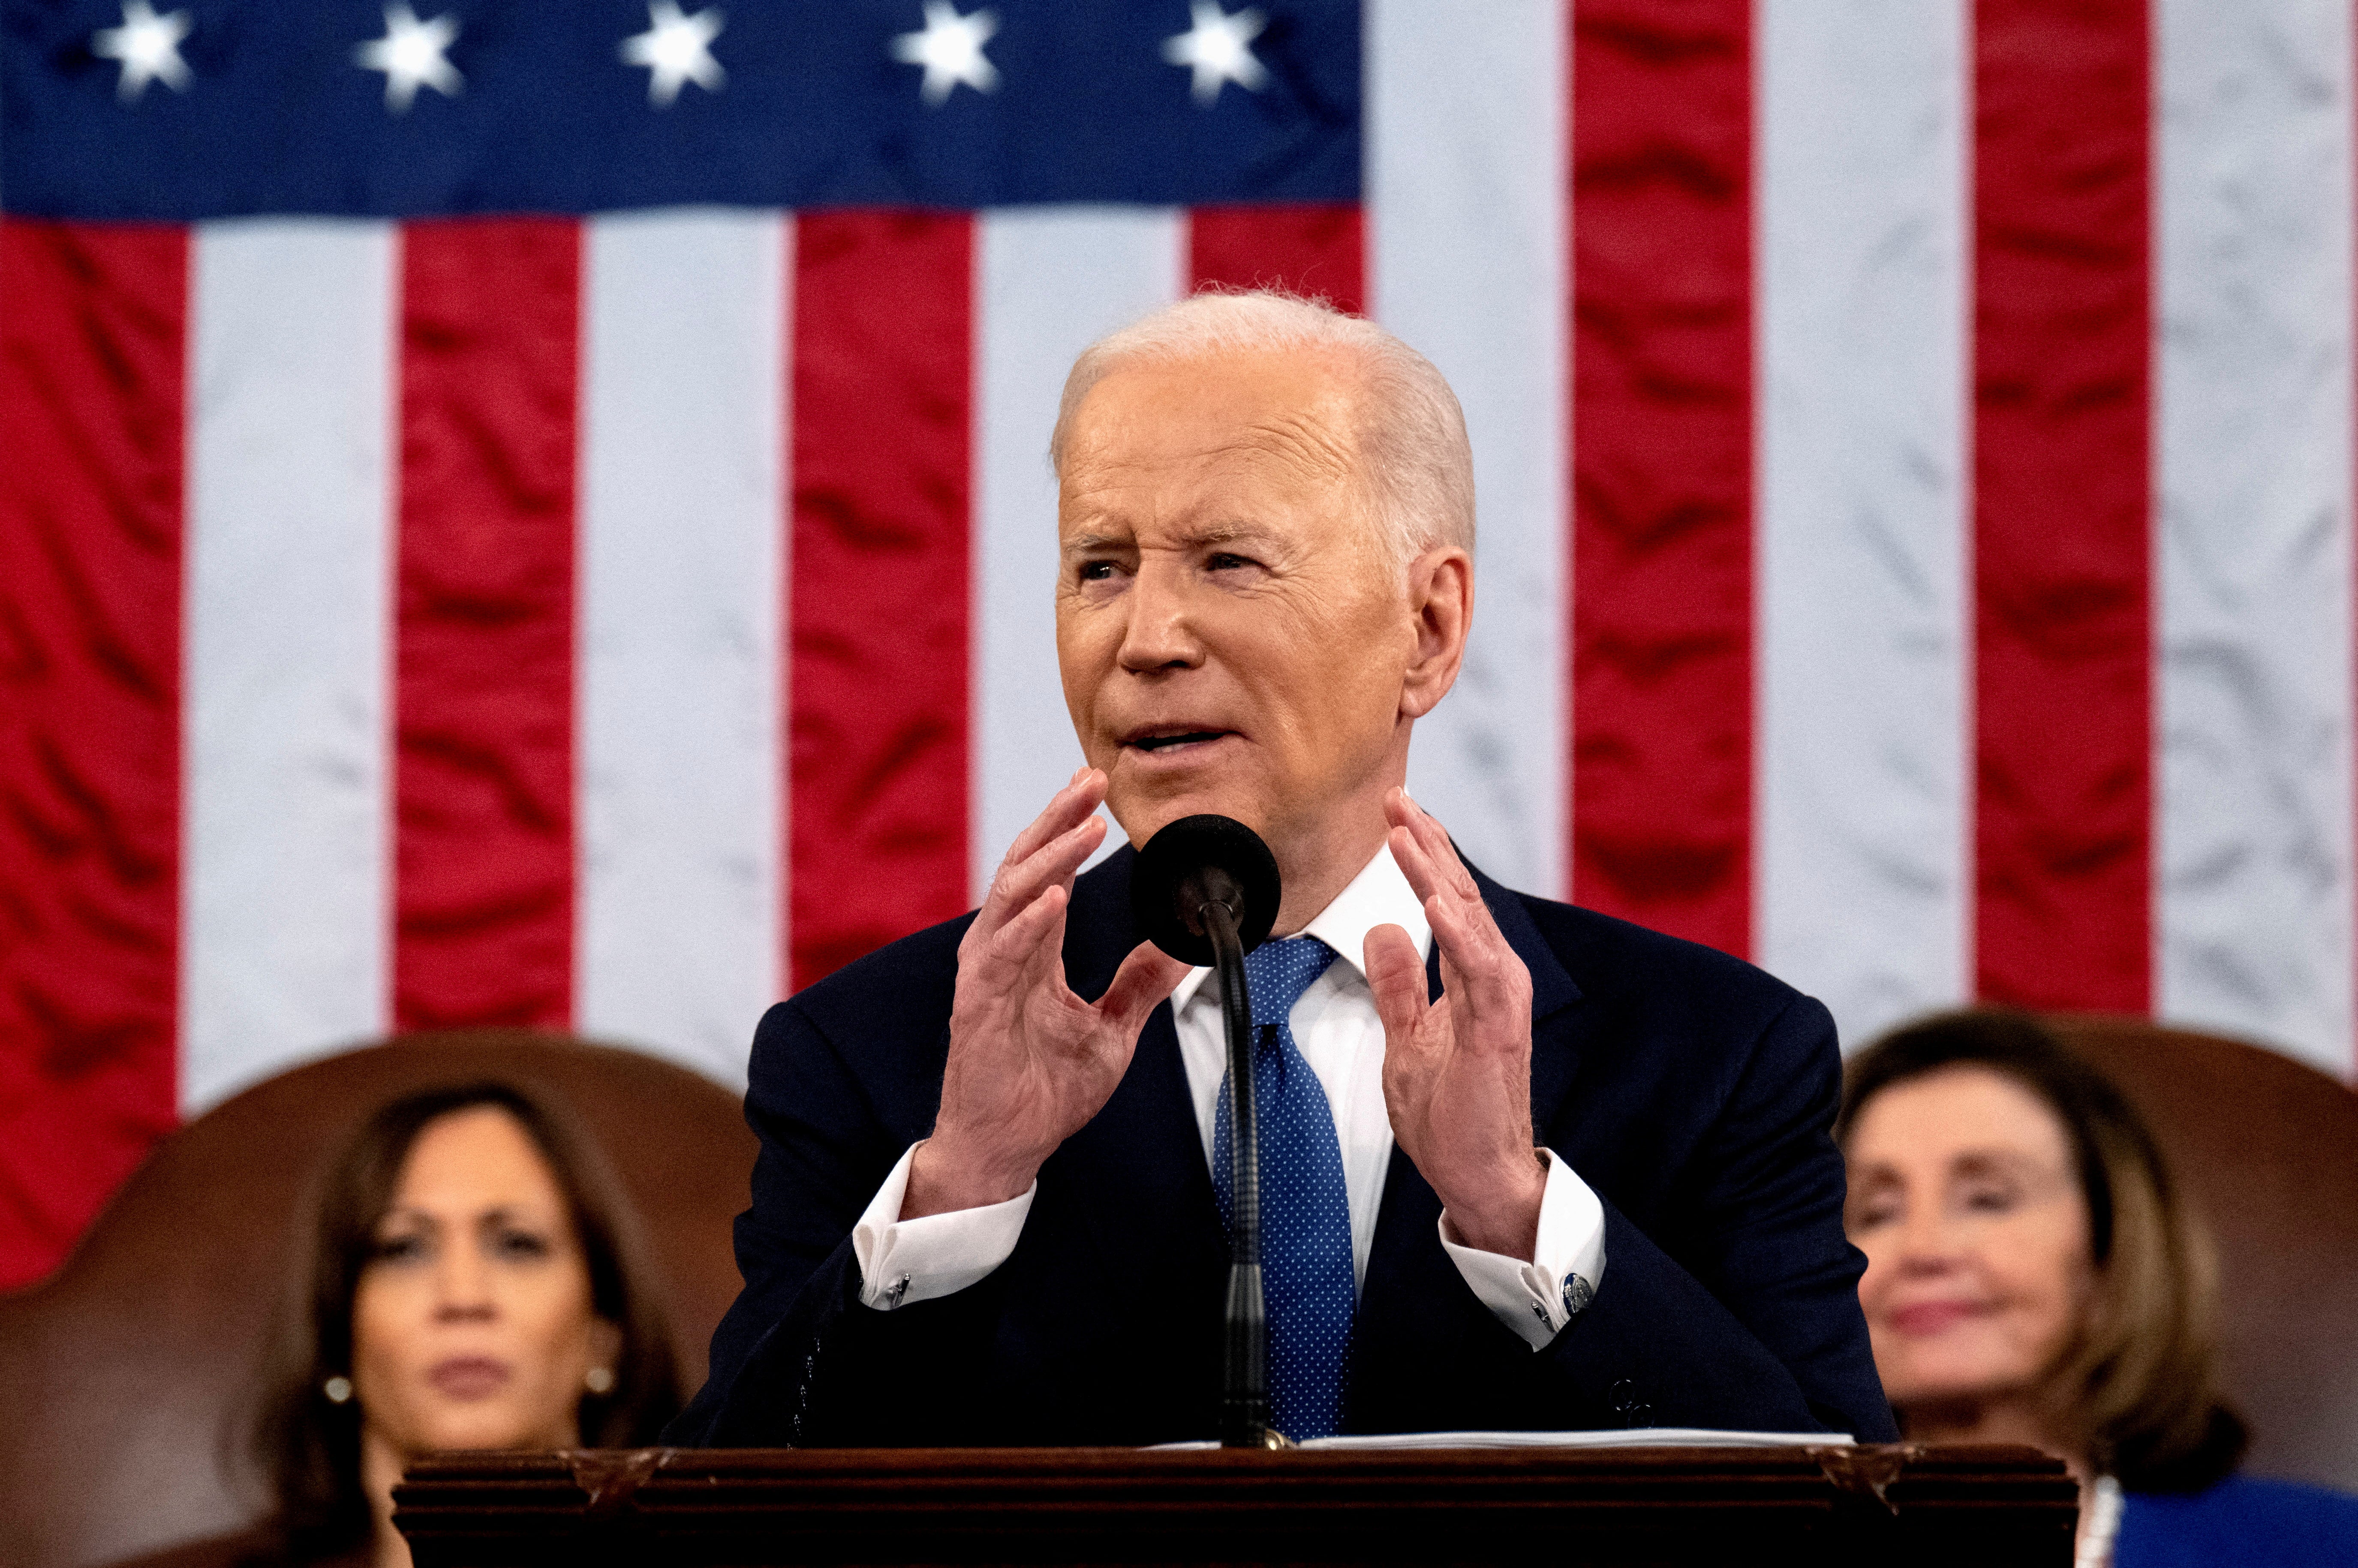 President Joe Biden dedicated a significant portion of his State of the Union address to burn pits